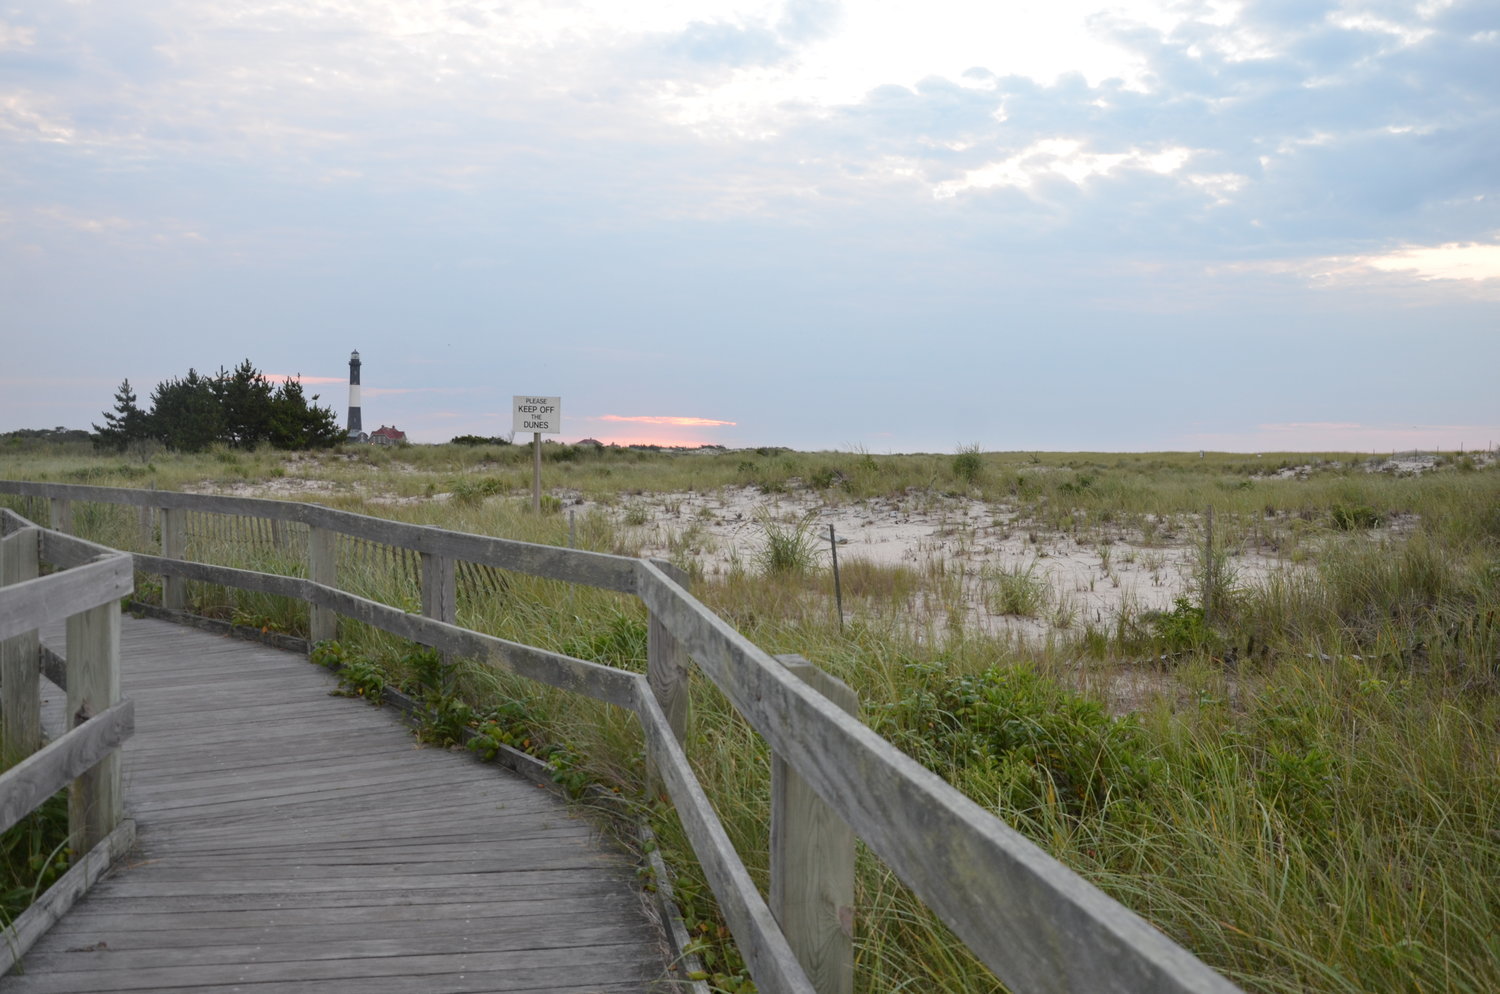 The Fire Island Lighthouse is a great place to visit with the whole family this summer